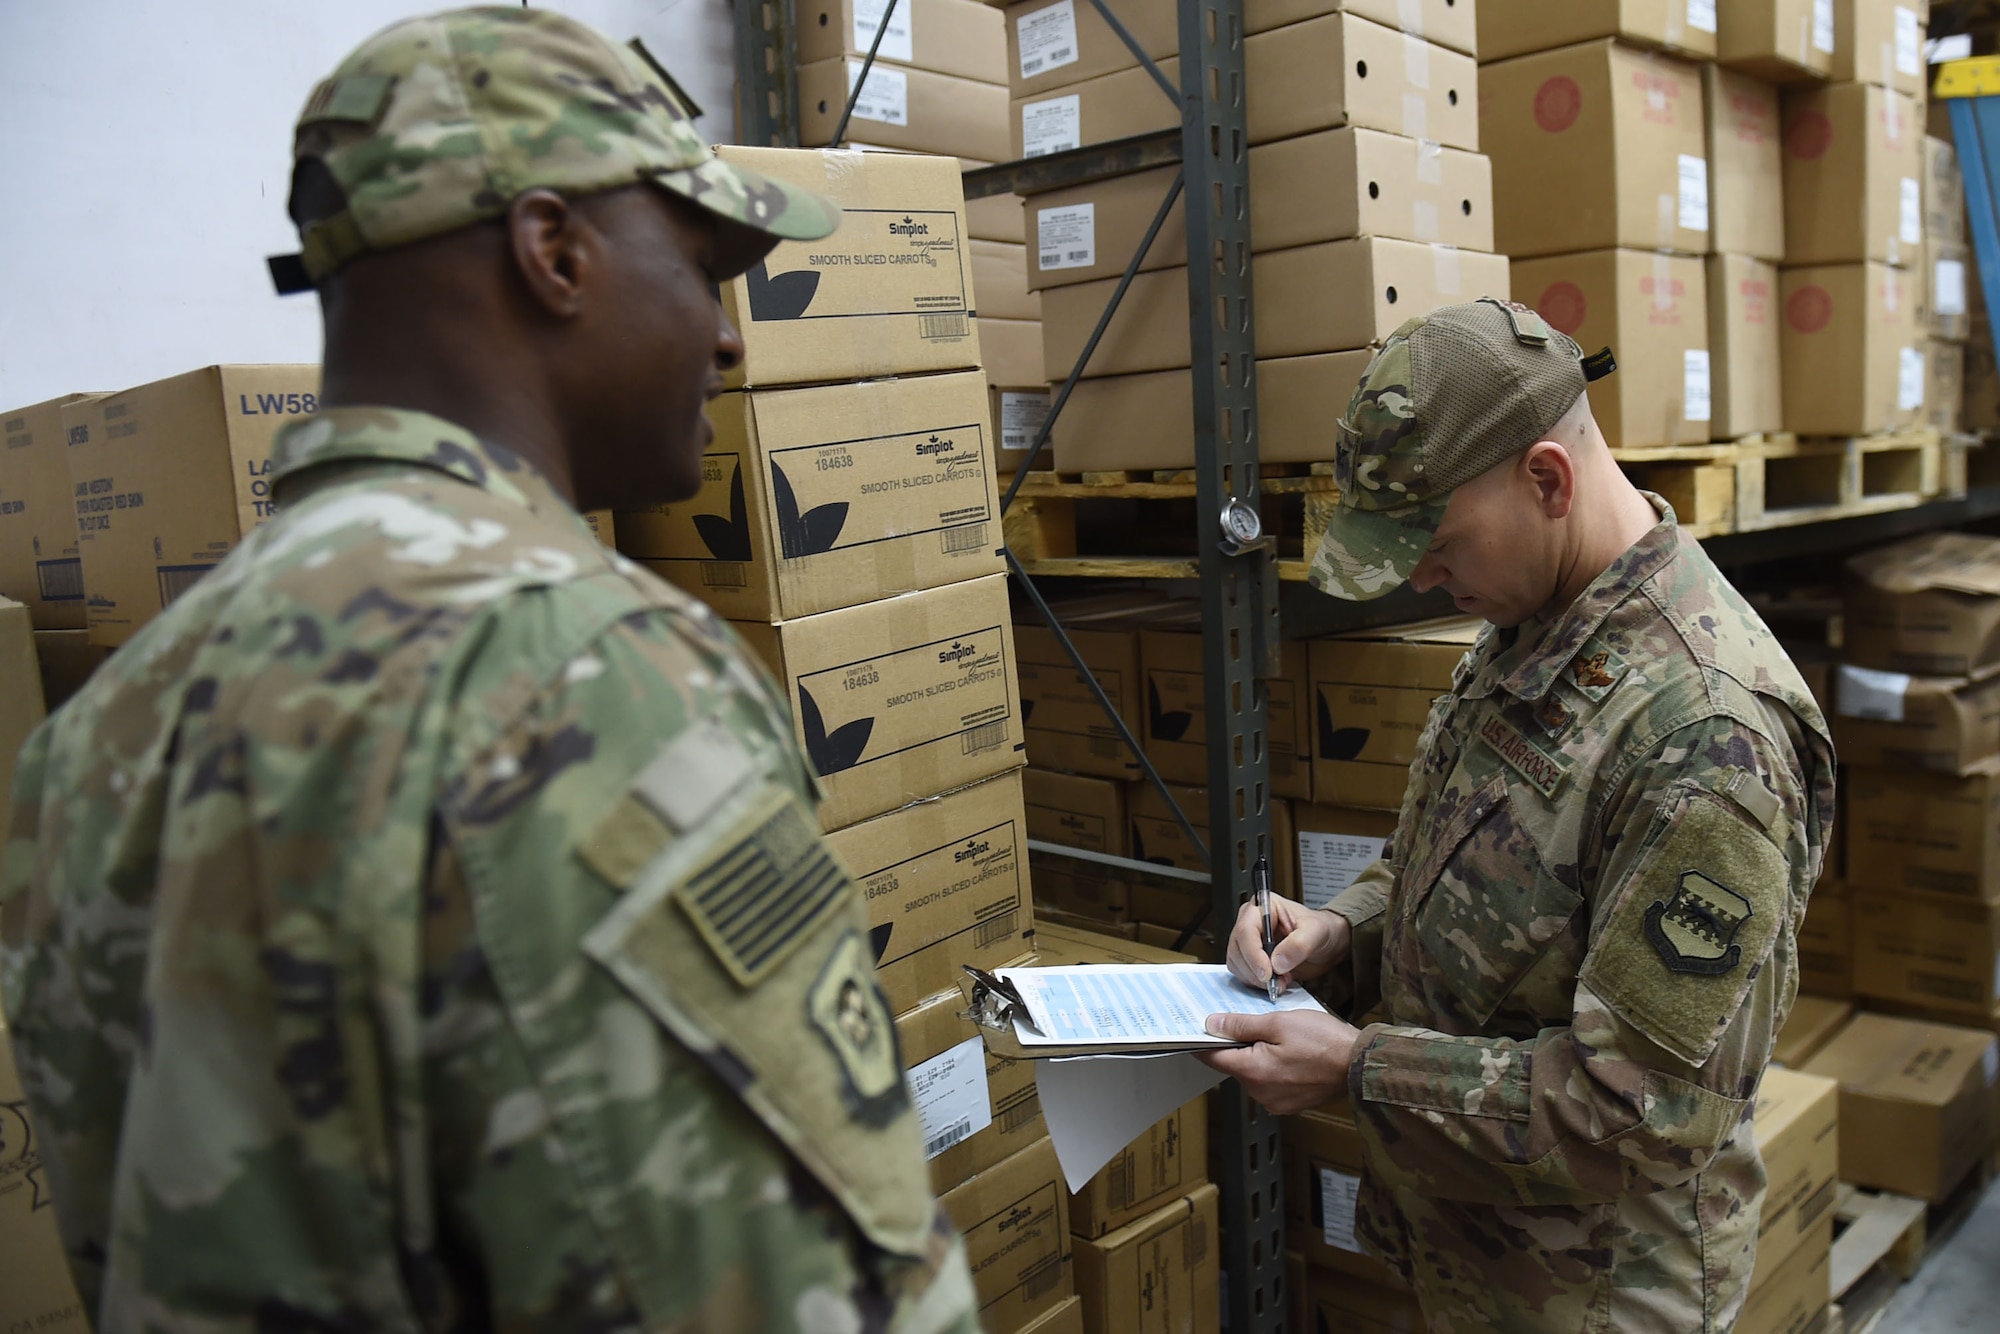 Two Airmen check temperatures in a food storage container